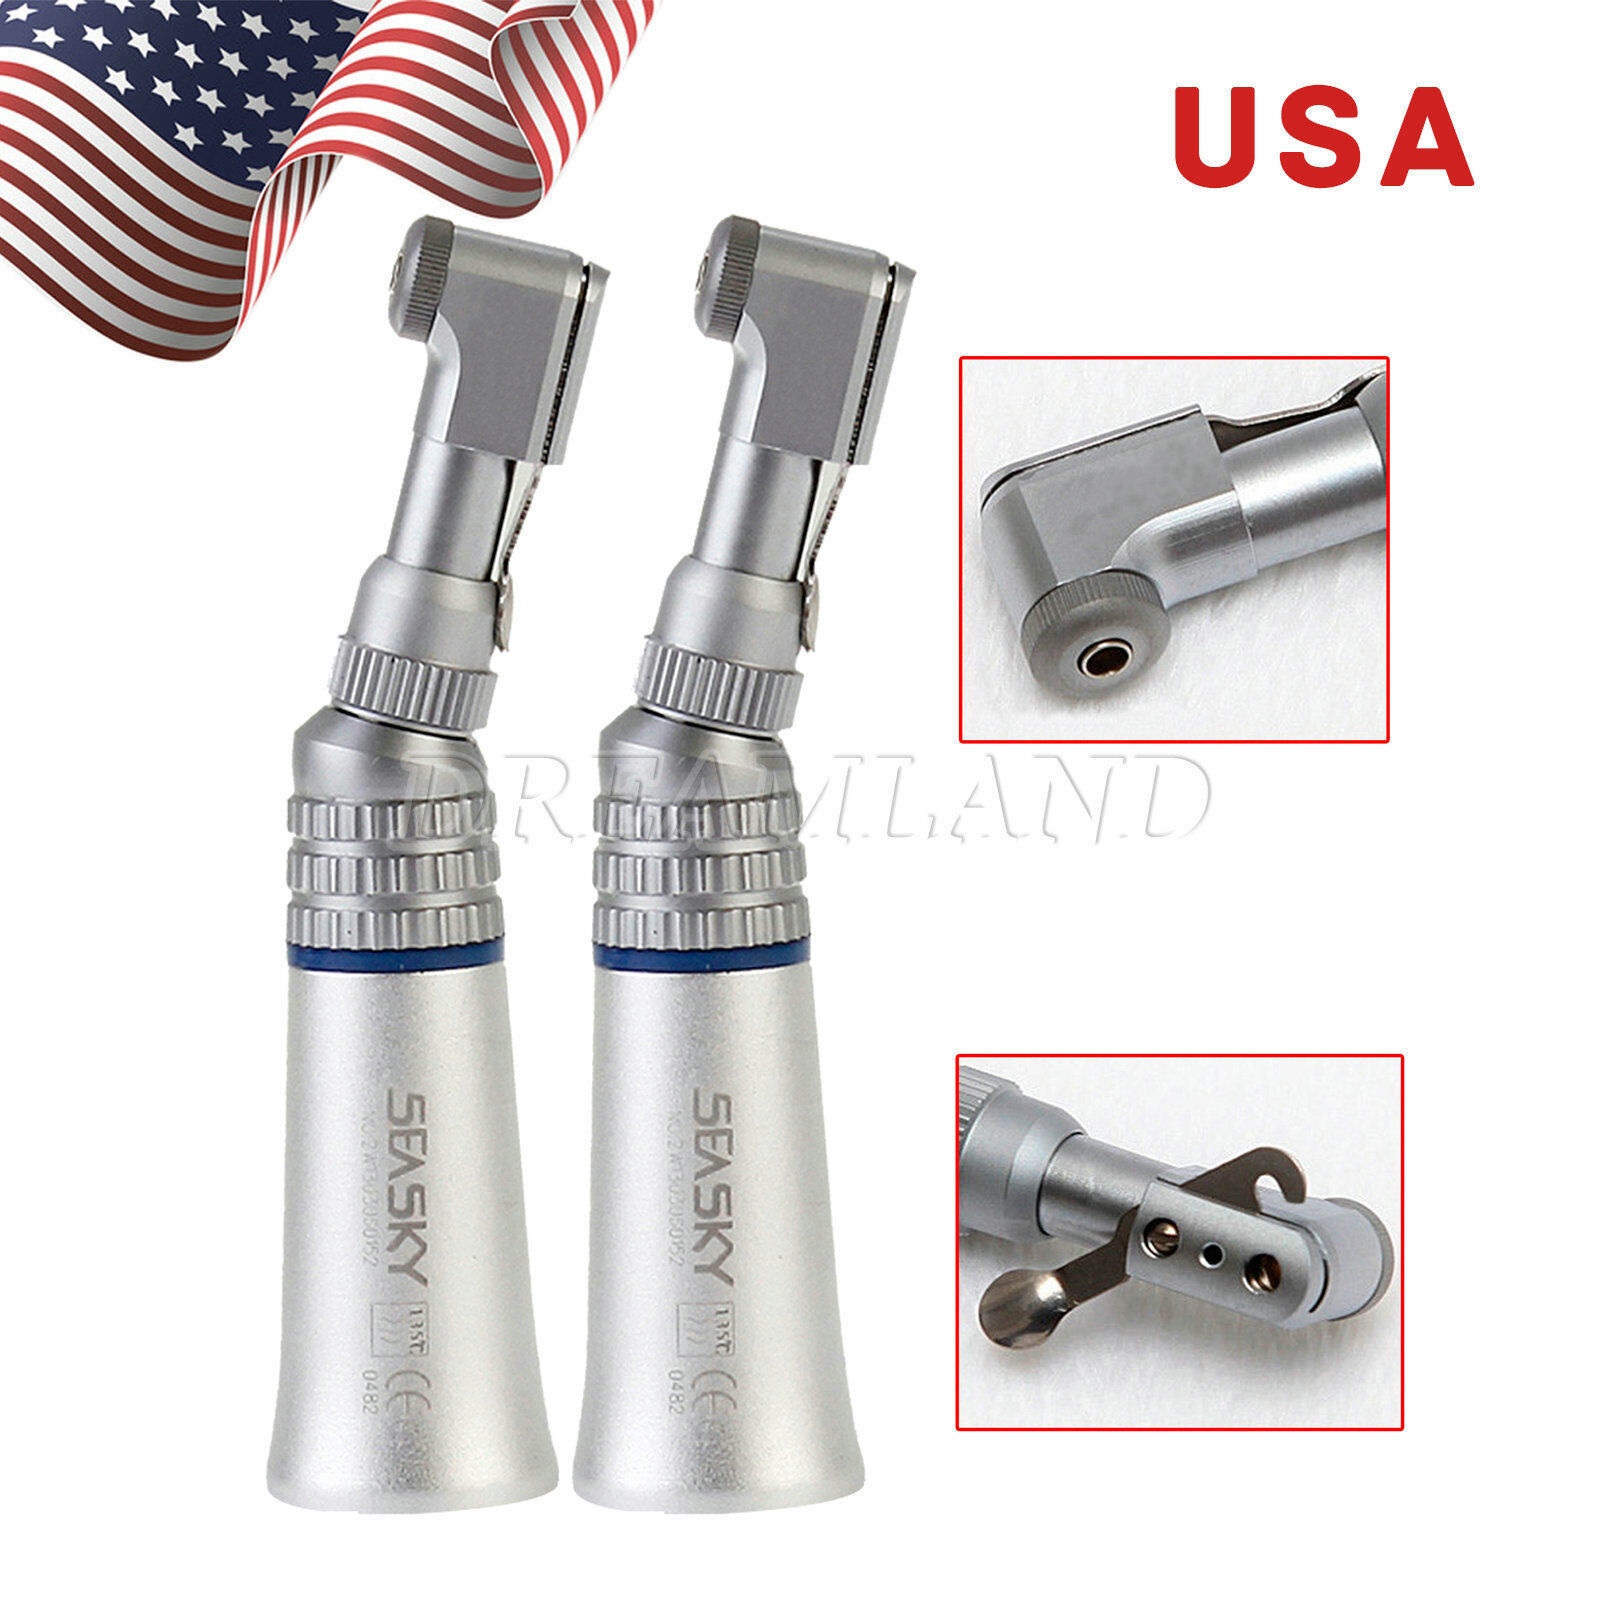 2Pack NSK Style Contra Angle Dental Slow Low Speed Handpiece E-Type Latch MO1E